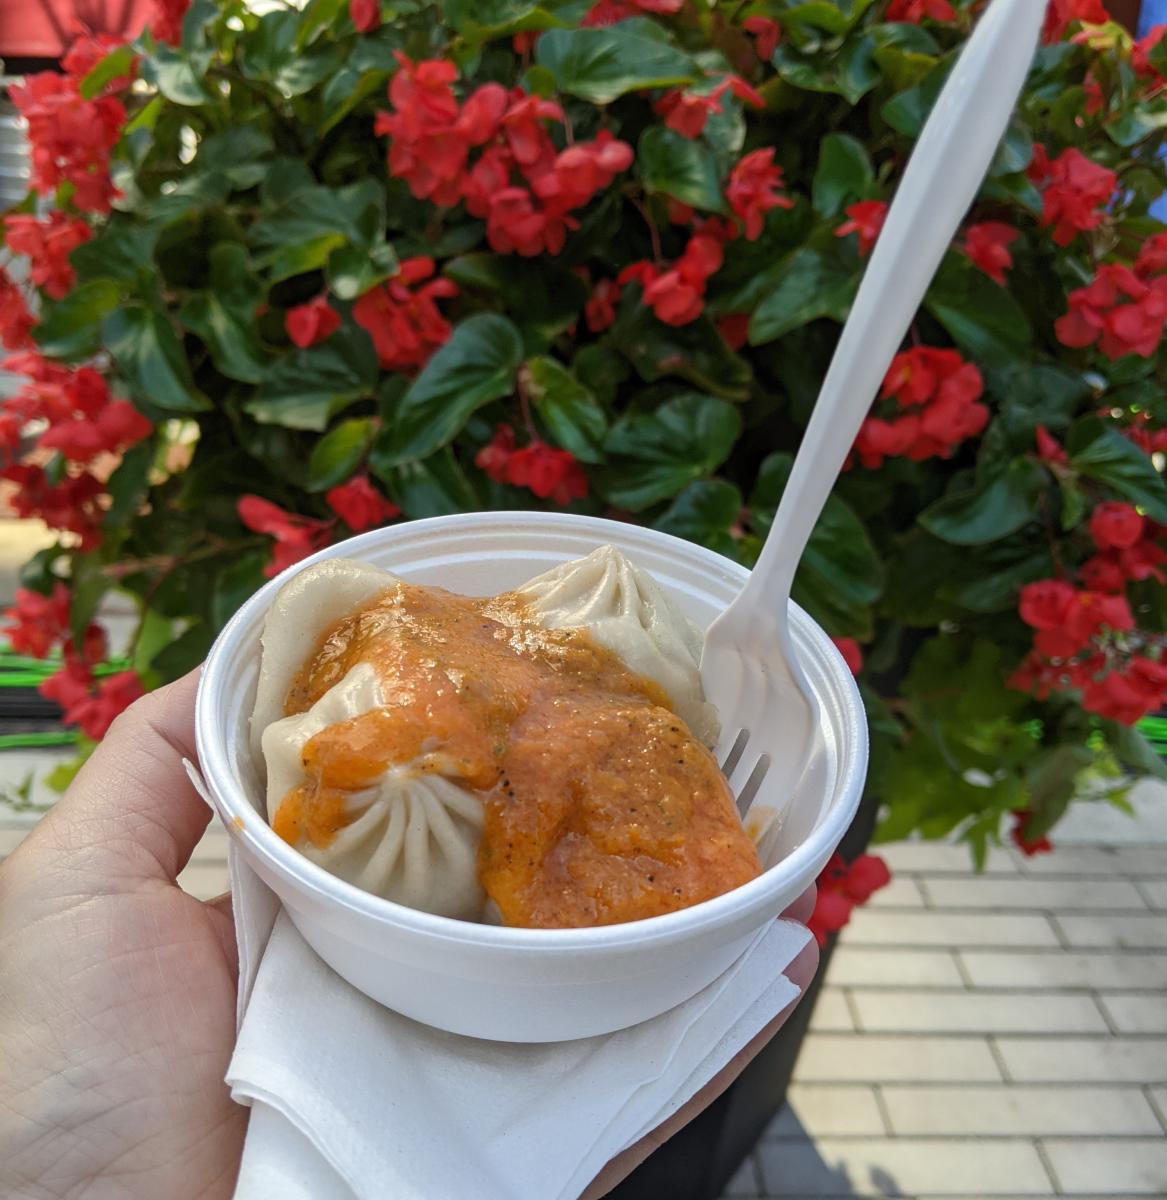 Image is of momo dumplings covered in a sauce in a small bowl.